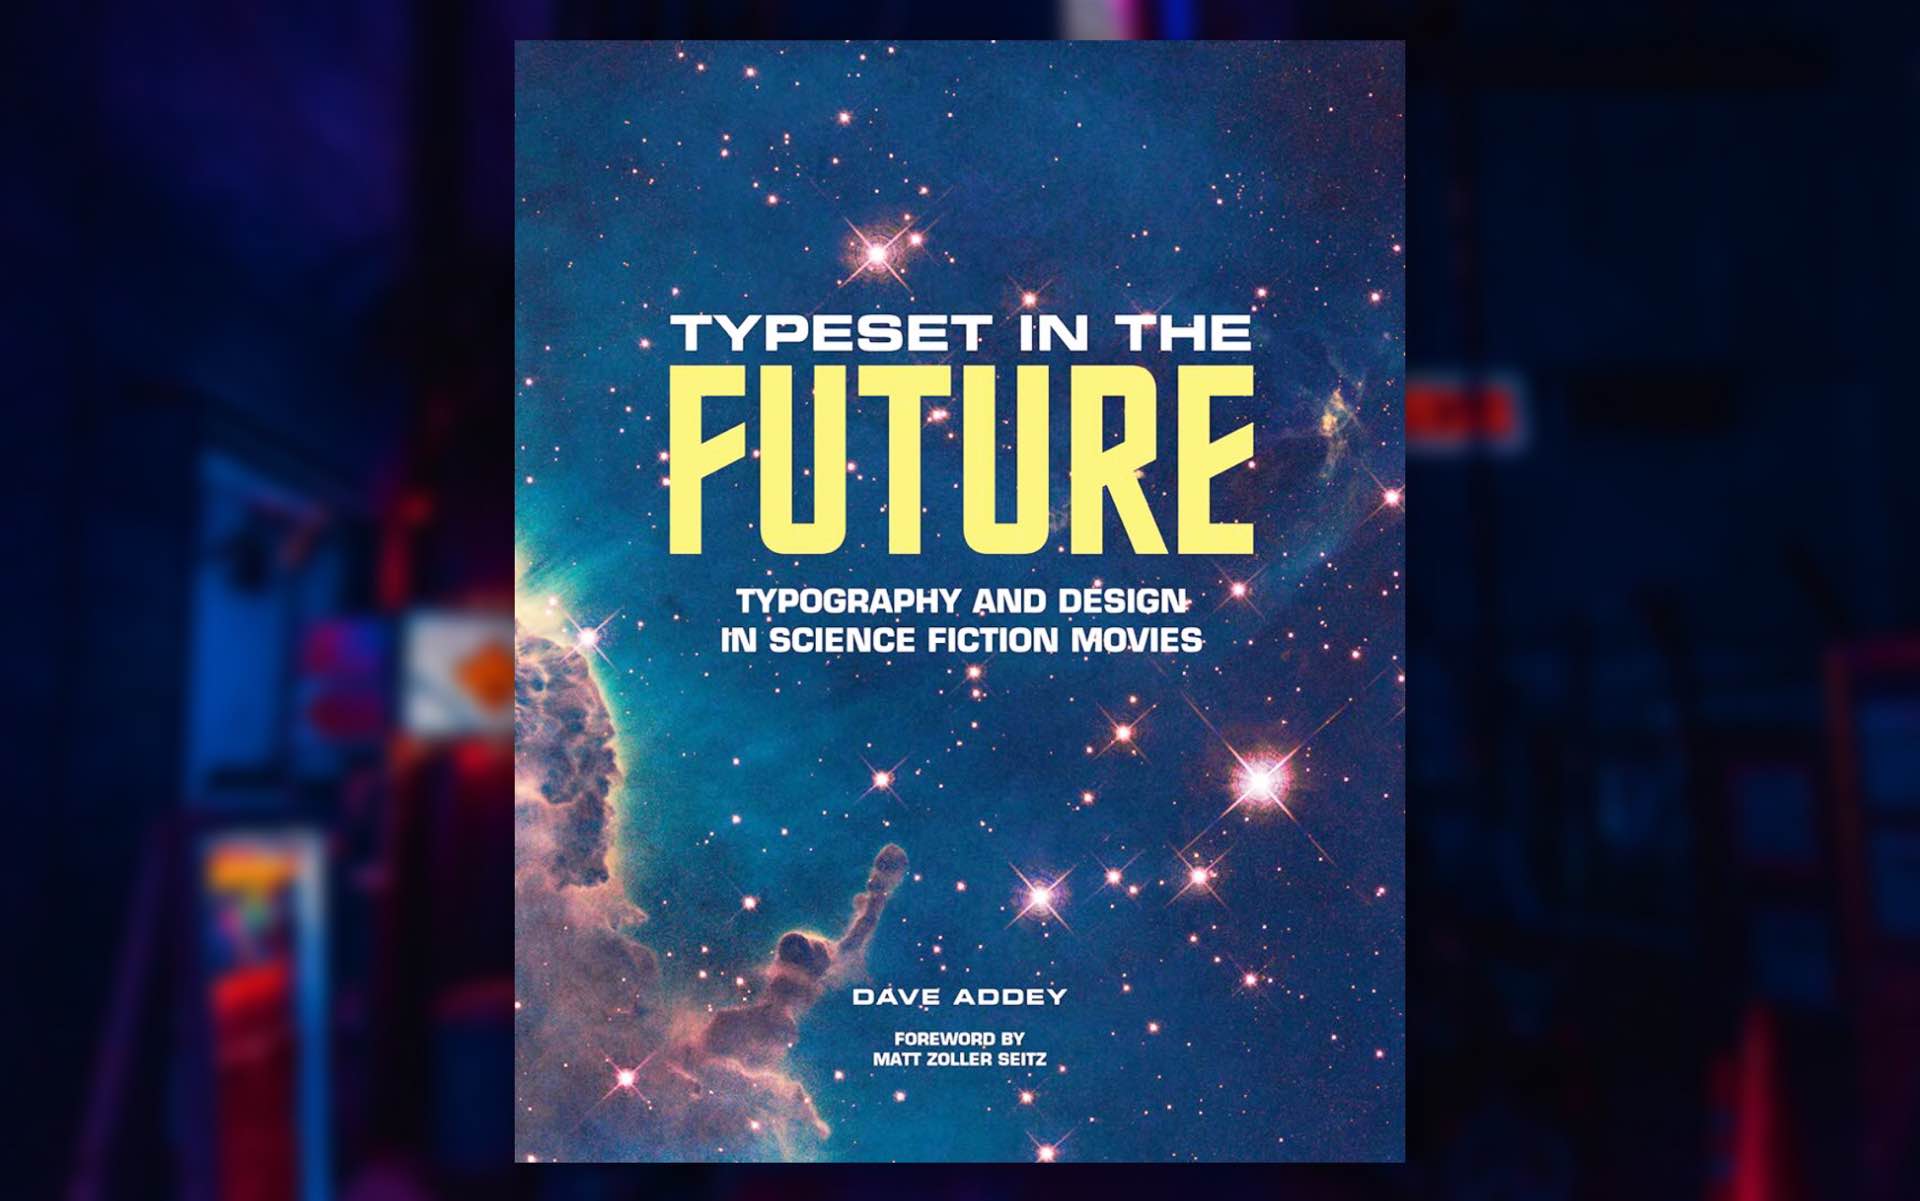 Typeset in the Future by Dave Addey. ($28 hardcover)